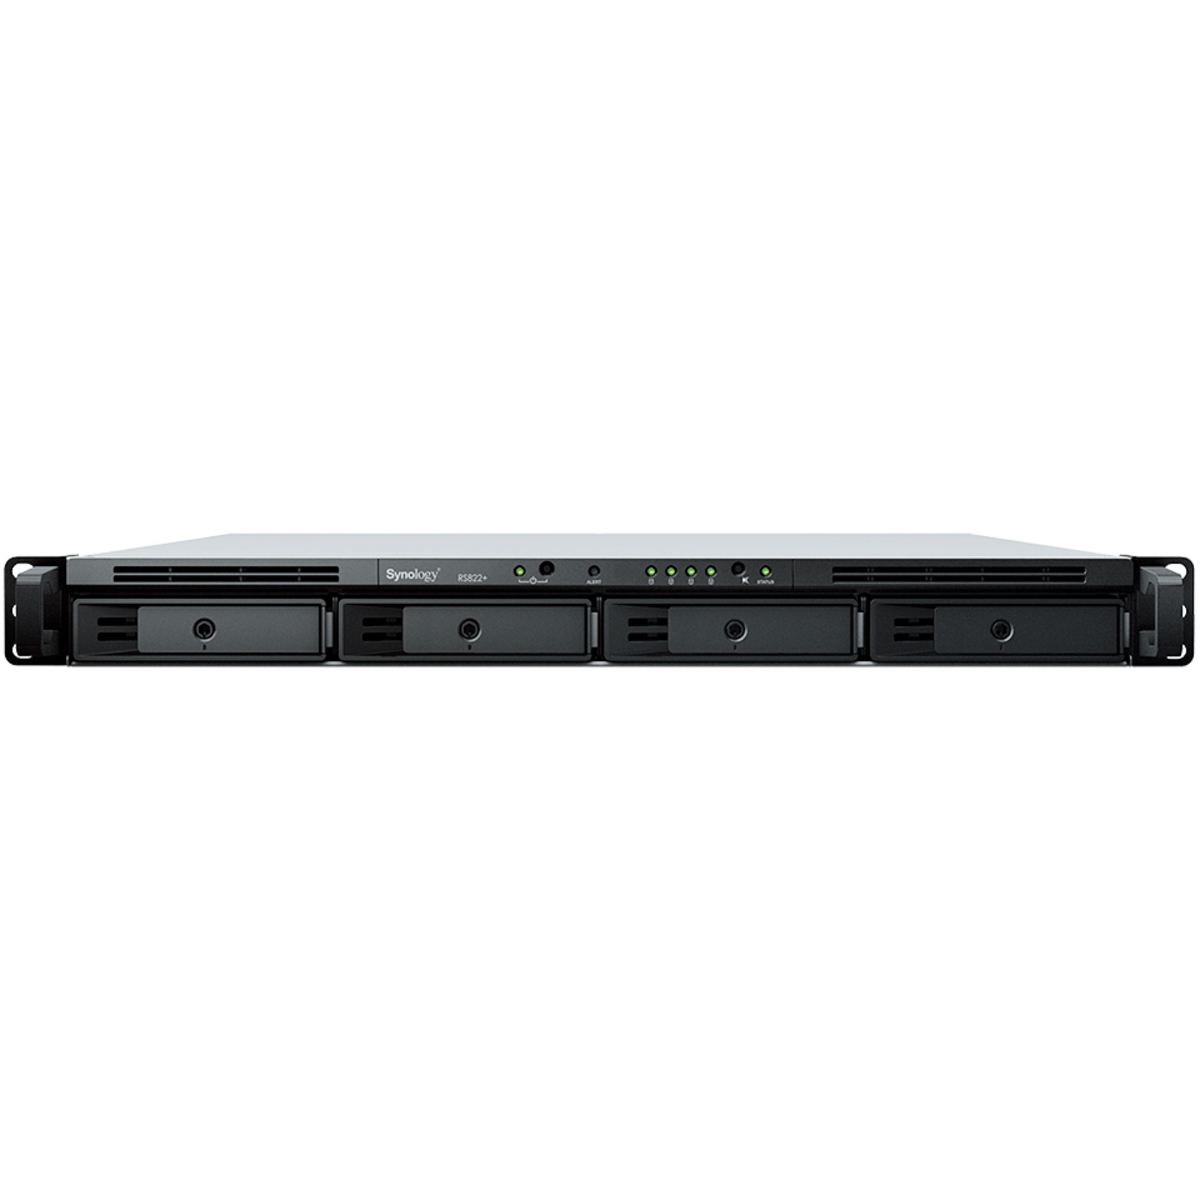 Synology RackStation RS822RP+ 32tb 4-Bay RackMount Multimedia / Power User / Business NAS - Network Attached Storage Device 4x8tb Seagate EXOS 7E10 ST8000NM017B 3.5 7200rpm SATA 6Gb/s HDD ENTERPRISE Class Drives Installed - Burn-In Tested - FREE RAM UPGRADE RackStation RS822RP+